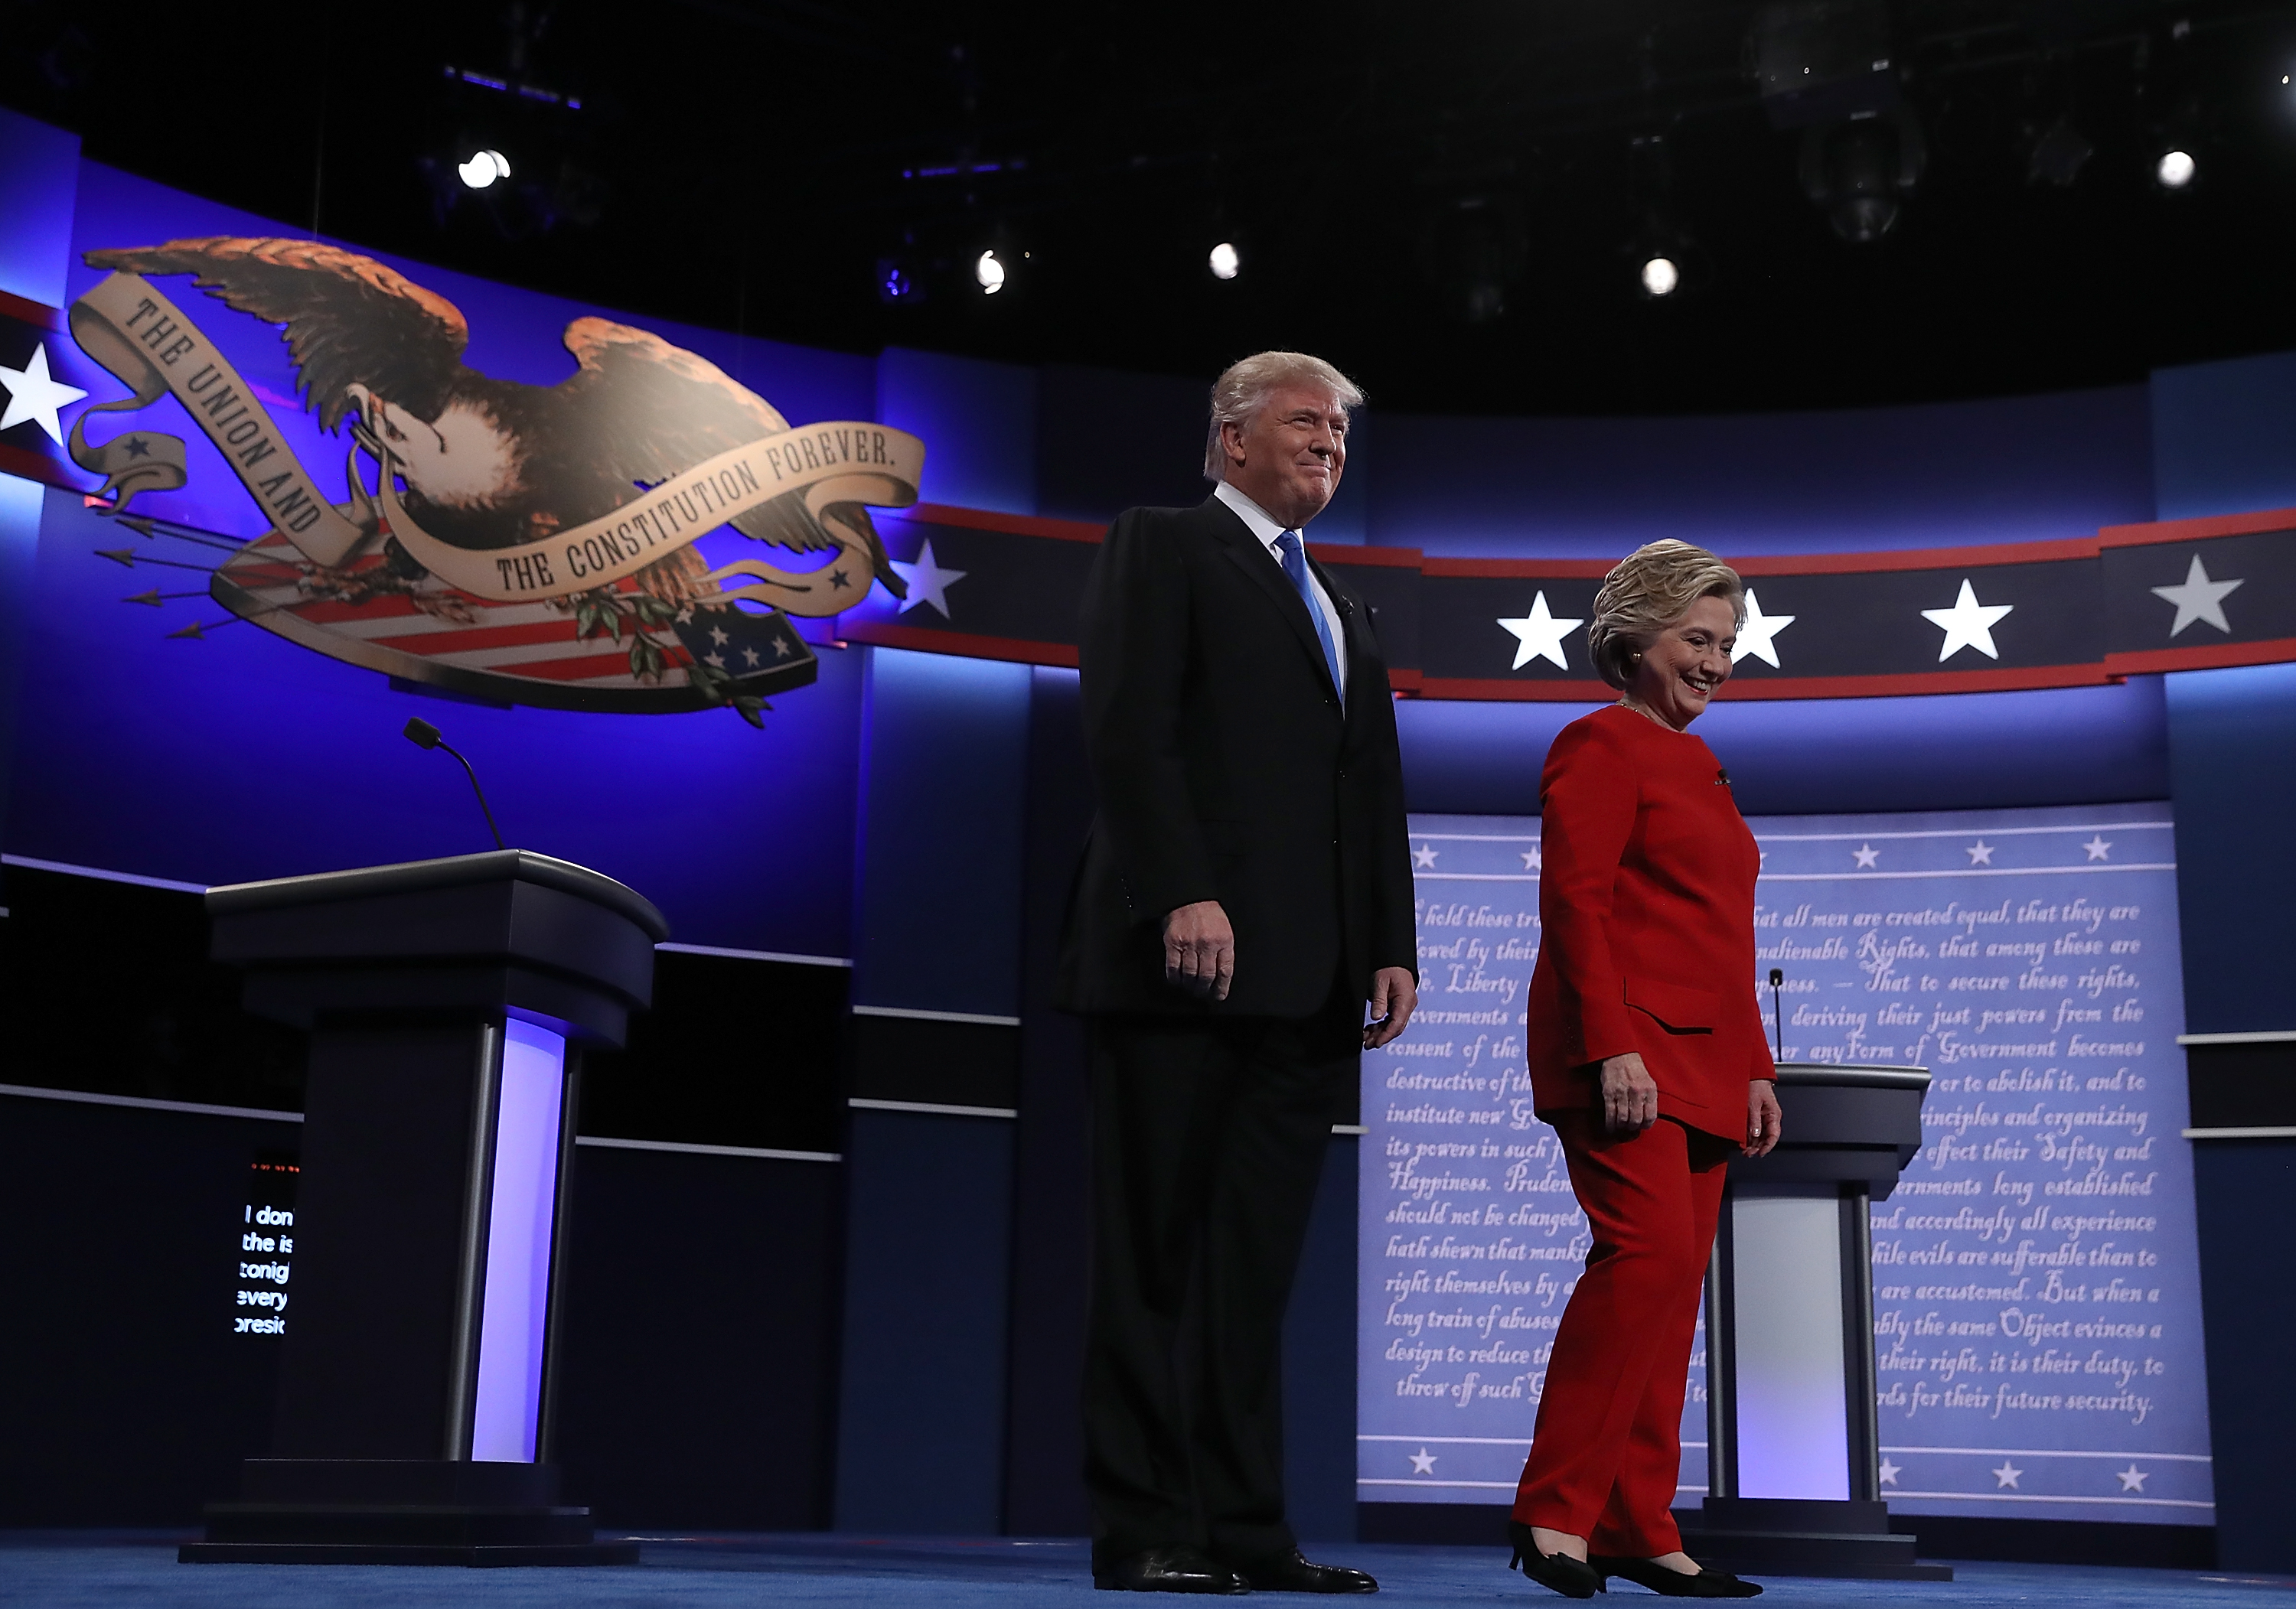 HEMPSTEAD, NY - SEPTEMBER 26: Democratic presidential nominee Hillary (R) and Republican presidential nominee Donald Trump (L) appear on stage before the start of the first presidential debate at Hofstra University on September 26, 2016 in Hempstead, New York. Tonight is the first of four debates for the 2016 election - three presidential and one vice presidential. (Photo by Justin Sullivan/Getty Images)